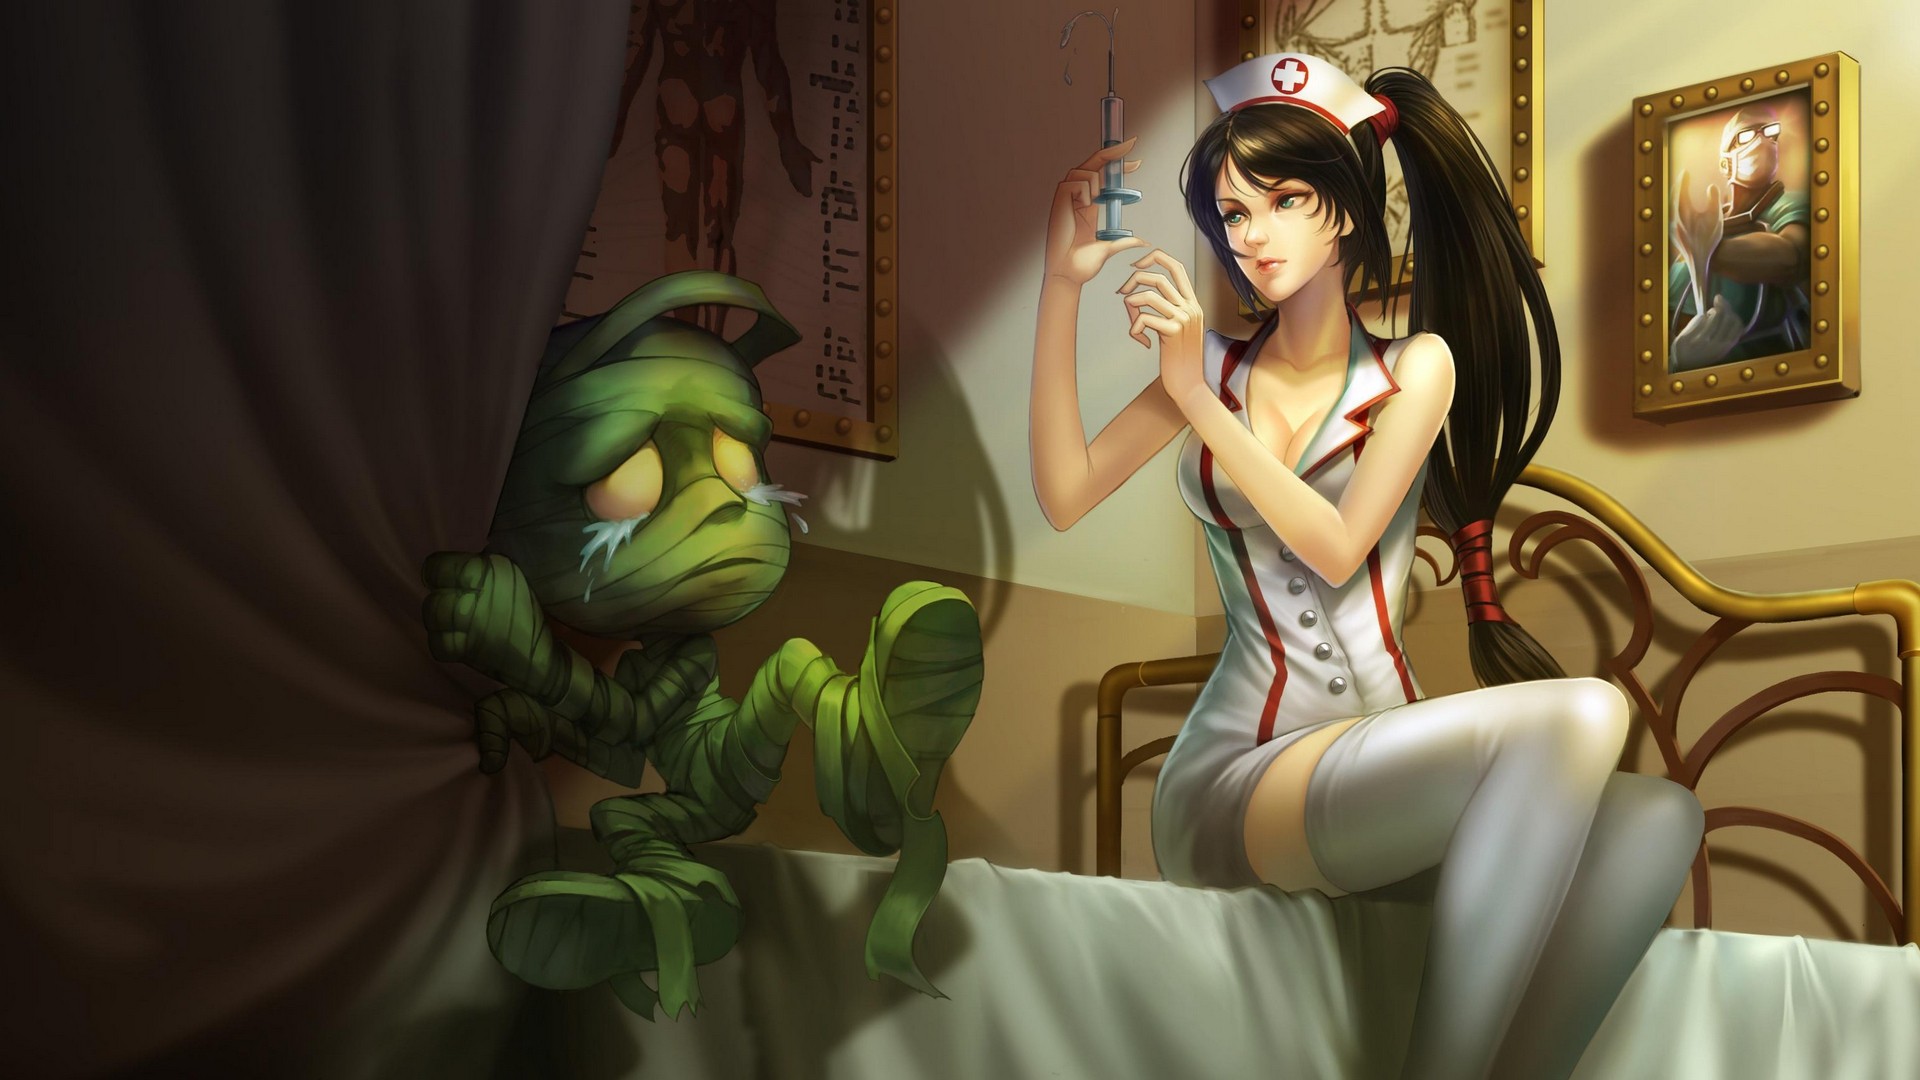 General 1920x1080 anime girls dark hair stockings syringe anime League of Legends Amumu (League of Legends) PC gaming video game art video game girls nurse outfit Akali (League of Legends)